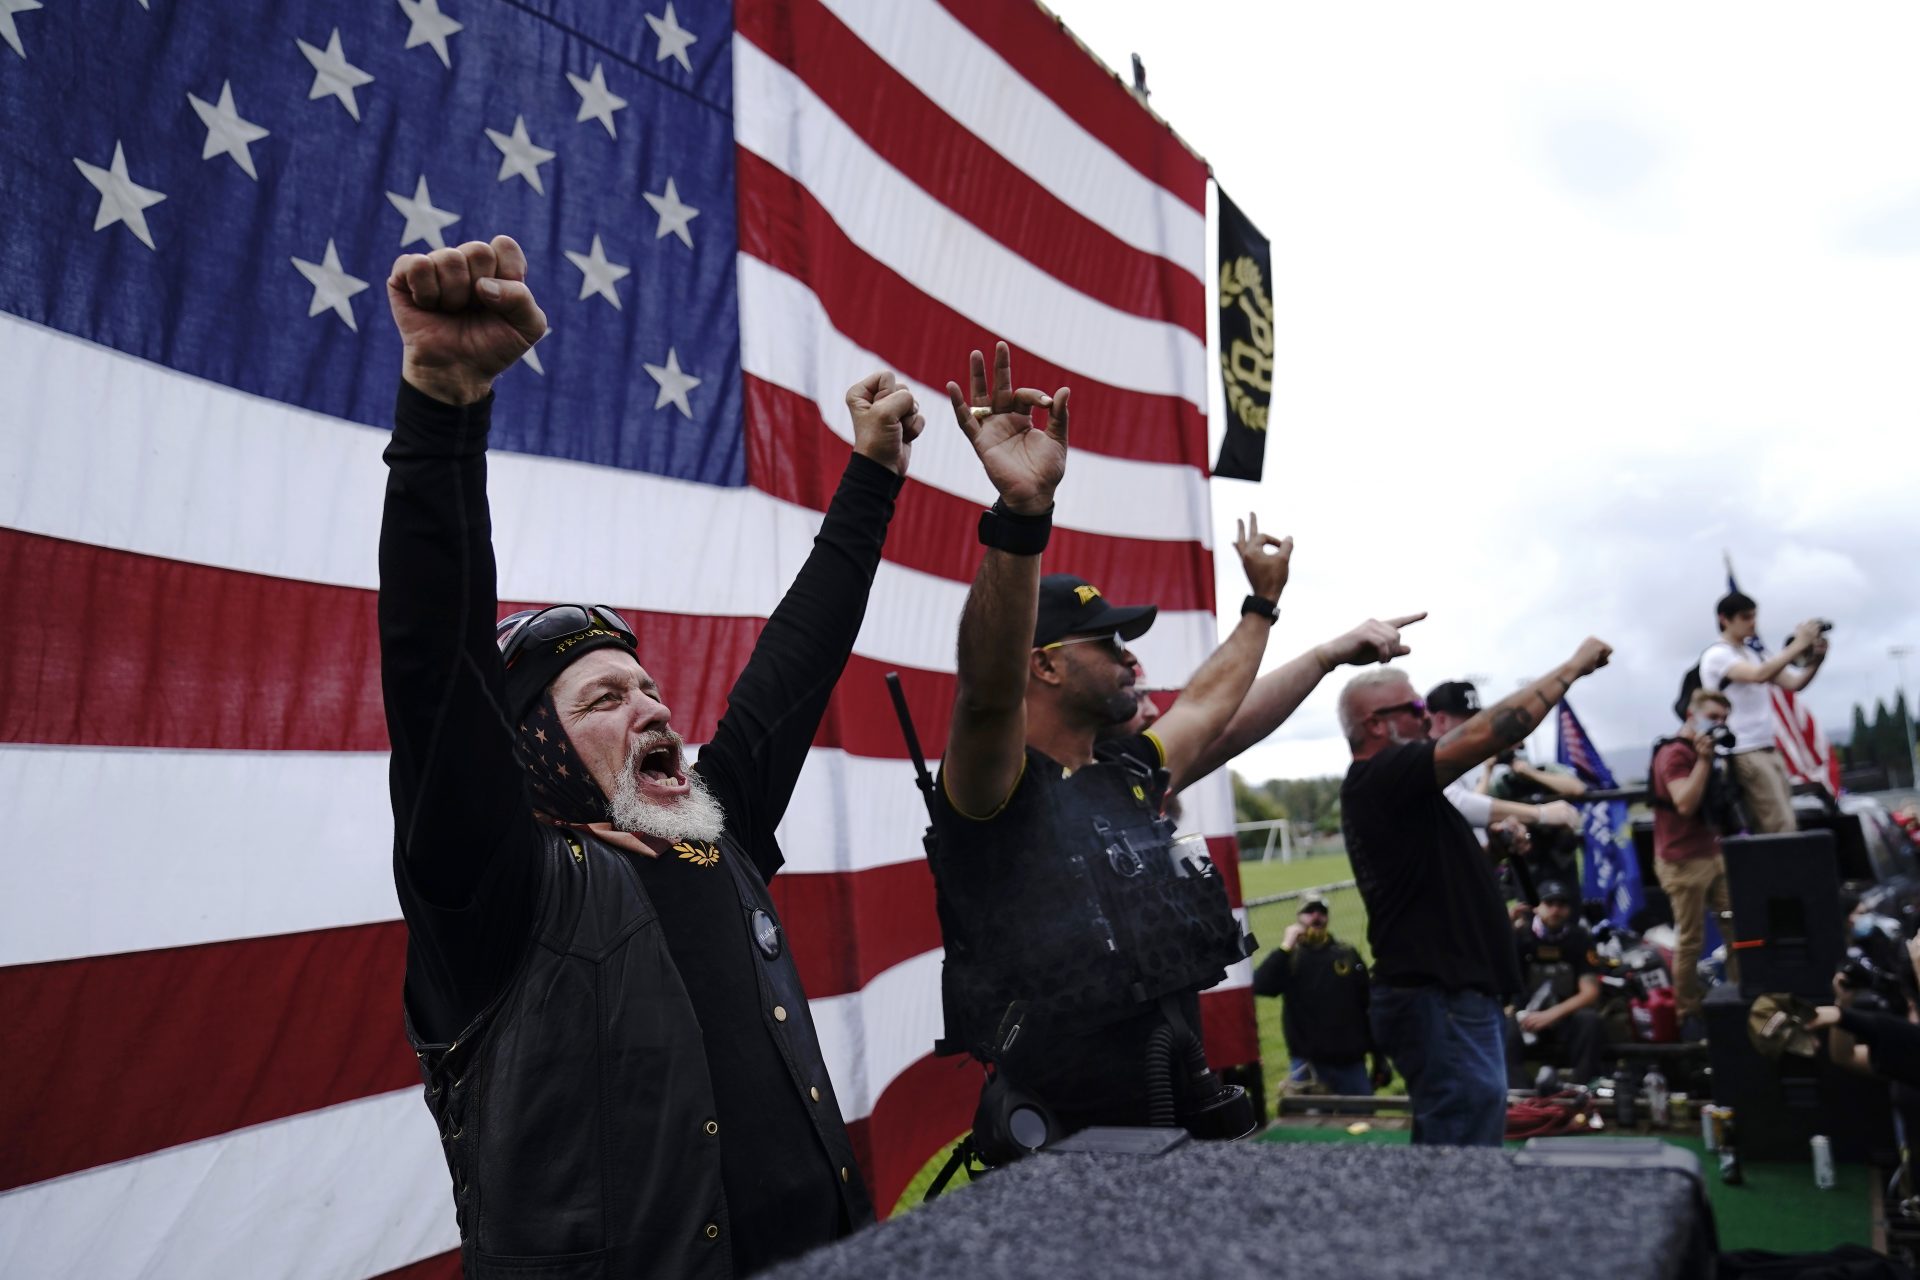 In this Sept. 26, 2020 file photo, members of the Proud Boys, including leader Enrique Tarrio, second from left, gesture and cheer on stage as they and other right-wing demonstrators rally in Portland, Ore.